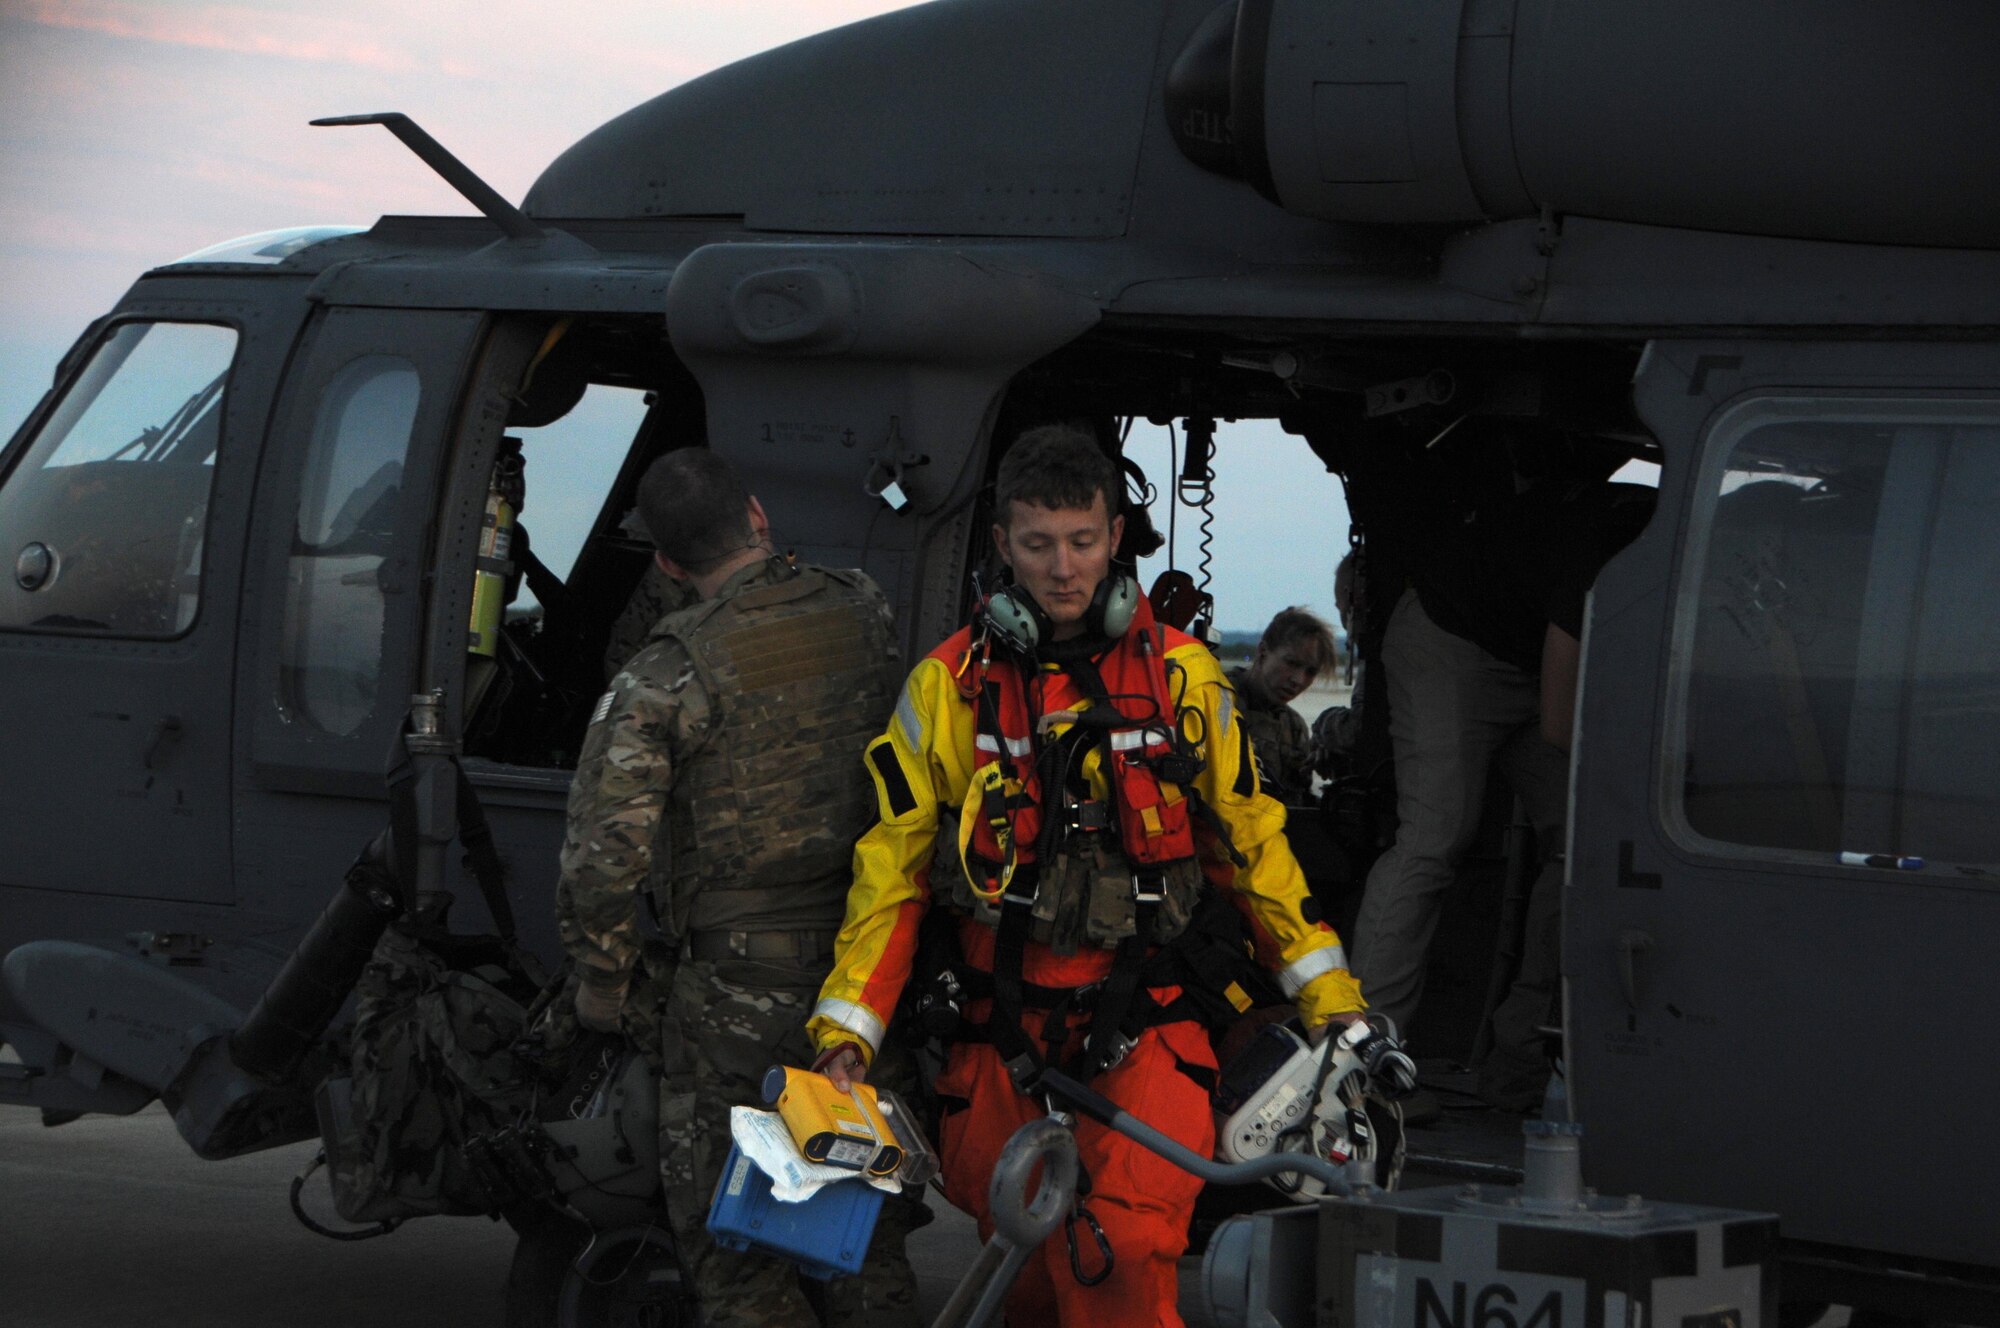 U.S. Air Force Senior Airman James N. Zambik, a pararescueman with the 103rd Rescue Squadron of the 106th Rescue Wing assigned to the New York Air National Guard, exits a HH-60 Pavehawk helicopter at Fort Hood, Texas, August 28, 2017. The efforts of Zambik and the Airmen of 106th helped save 255 people and two dogs during the day's response to Hurricane Harvey. (U.S. Air National Guard photo/Airman 1st Class Daniel H. Farrell)